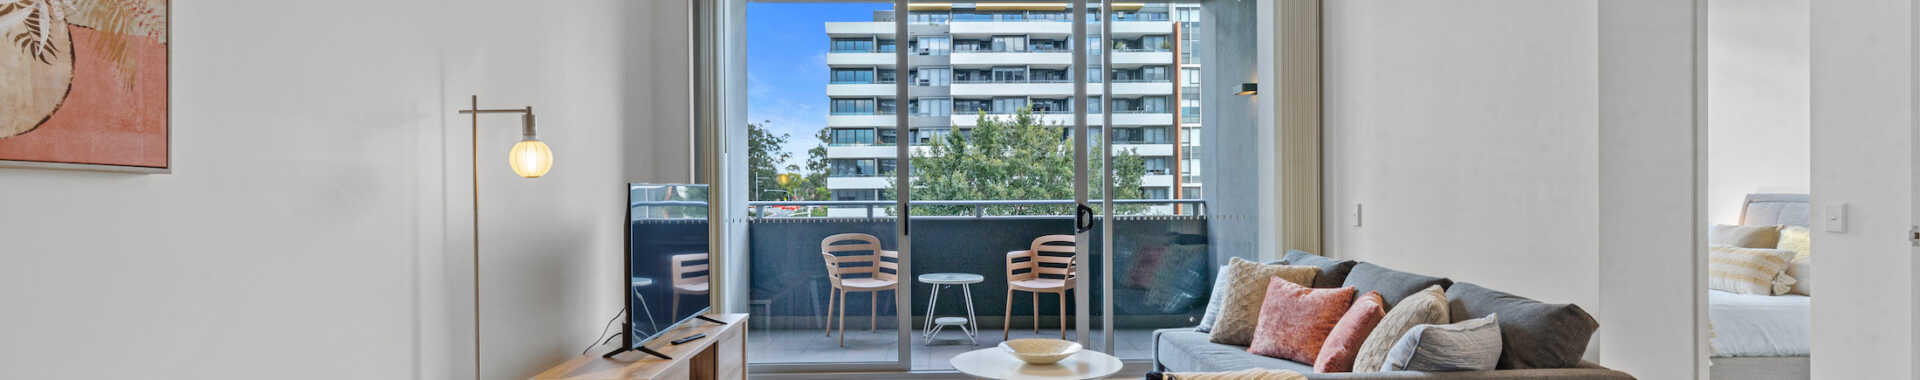 Astra Apartments Macquarie Park Saunders Close - Corporate accommodation